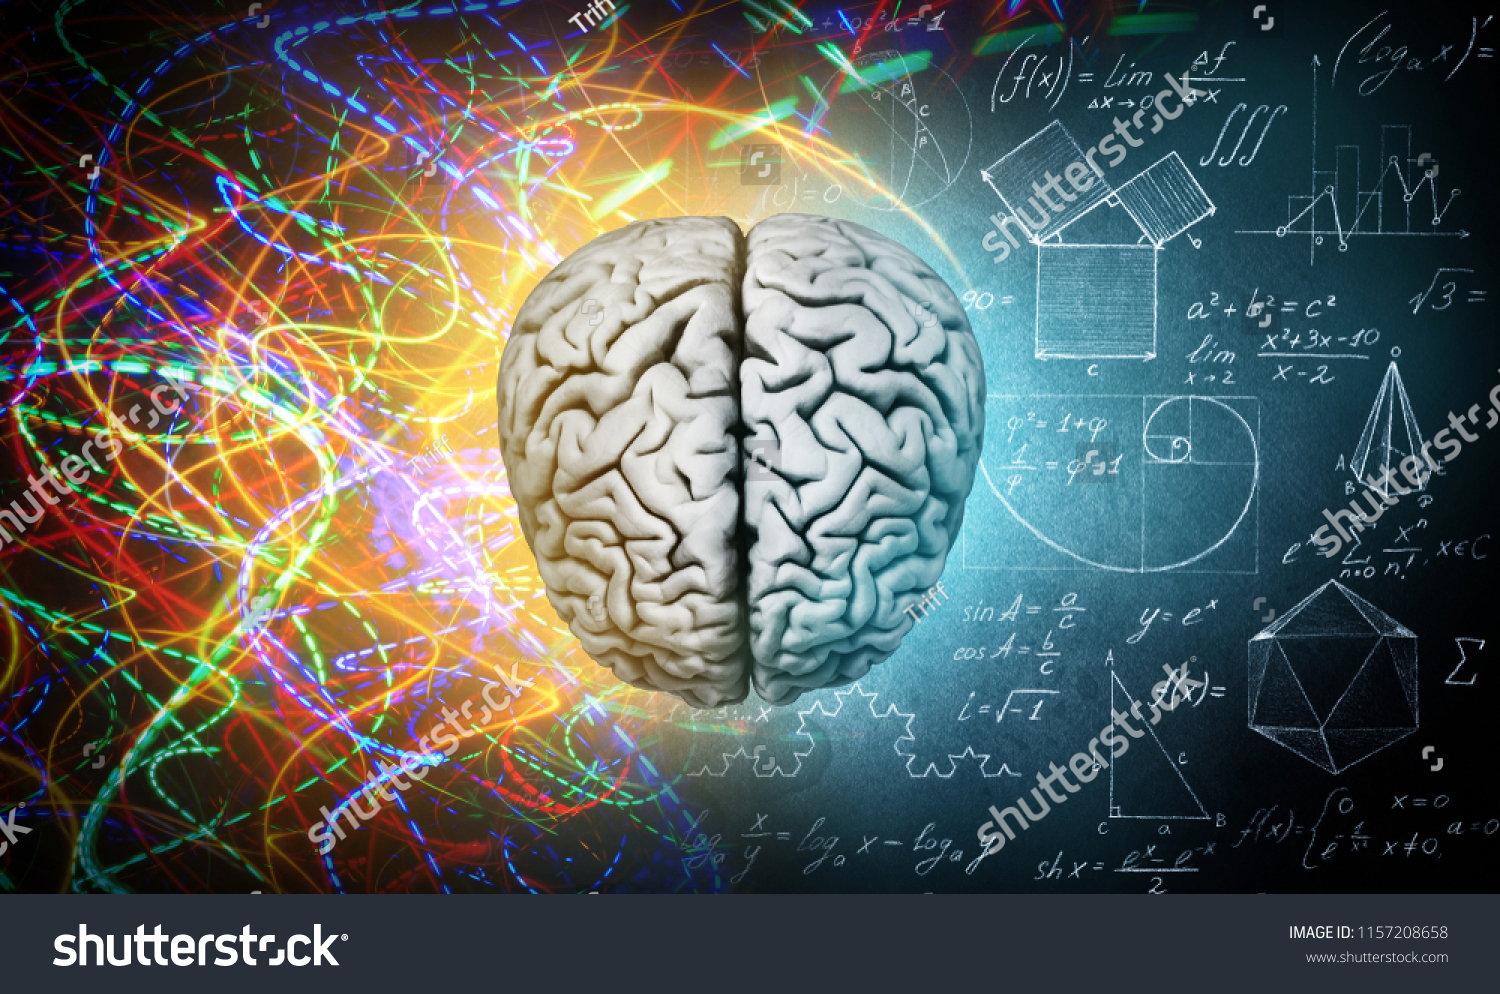 The concept of the human brain. The right creative hemisphere versus the left logical hemisphere. Education, science and medical abstract background. #1157208658